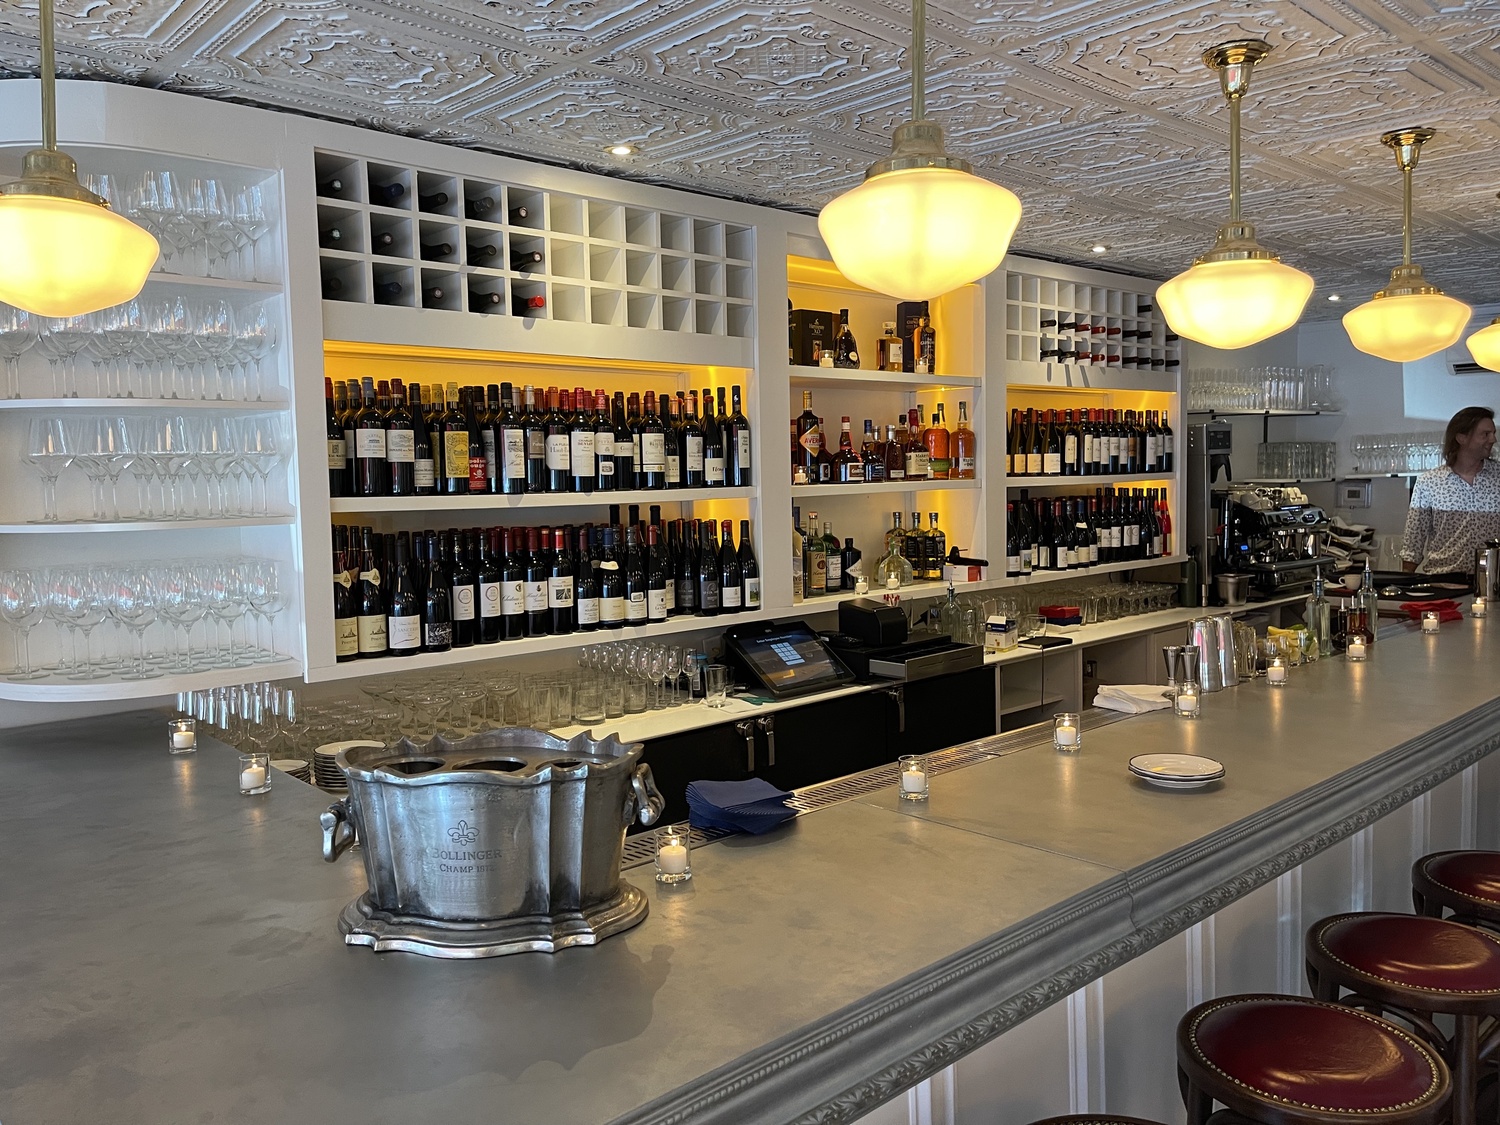 Vin Sur Vingt wine bar is now open on Main Street in Sag Harbor and serving up a wide selection of French wines. COURTESY VIN SUR VINGT